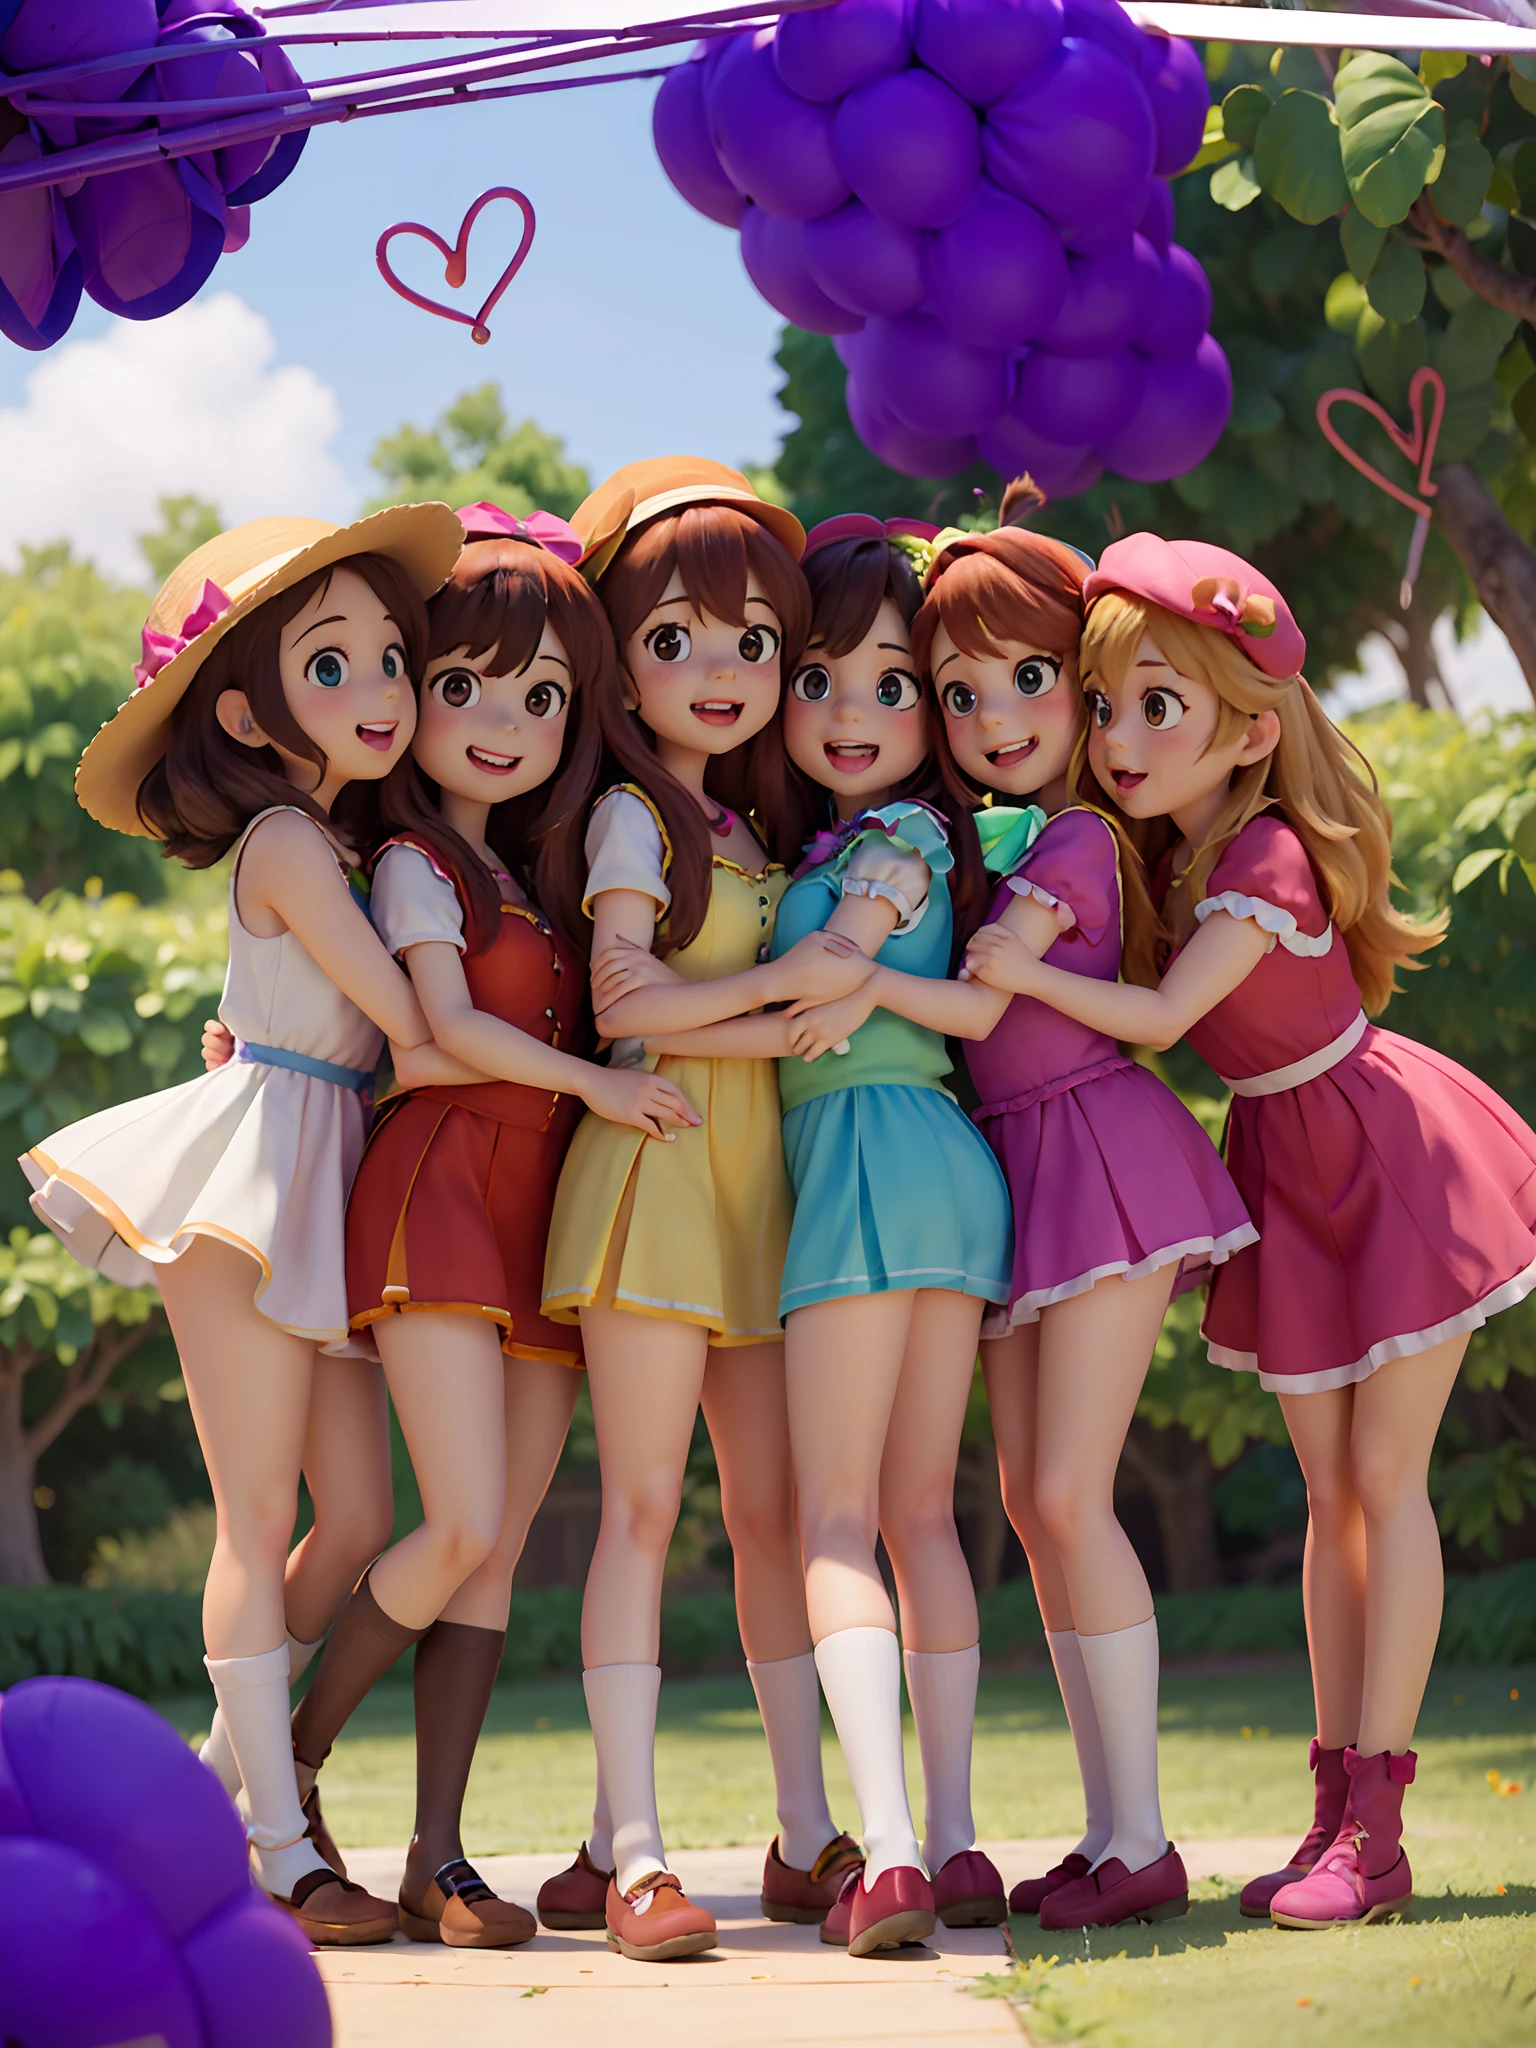 there are four girls in dresses and hats posing for a picture, official fanart, ddlc, kawaii hq render, stylized anime, made with anime painter studio, anime styled 3d, official render, promotional render, idolmaster, anime stylized, cute 3 d render, [ digital art ]!!, cute pose, realistic anime 3 d style